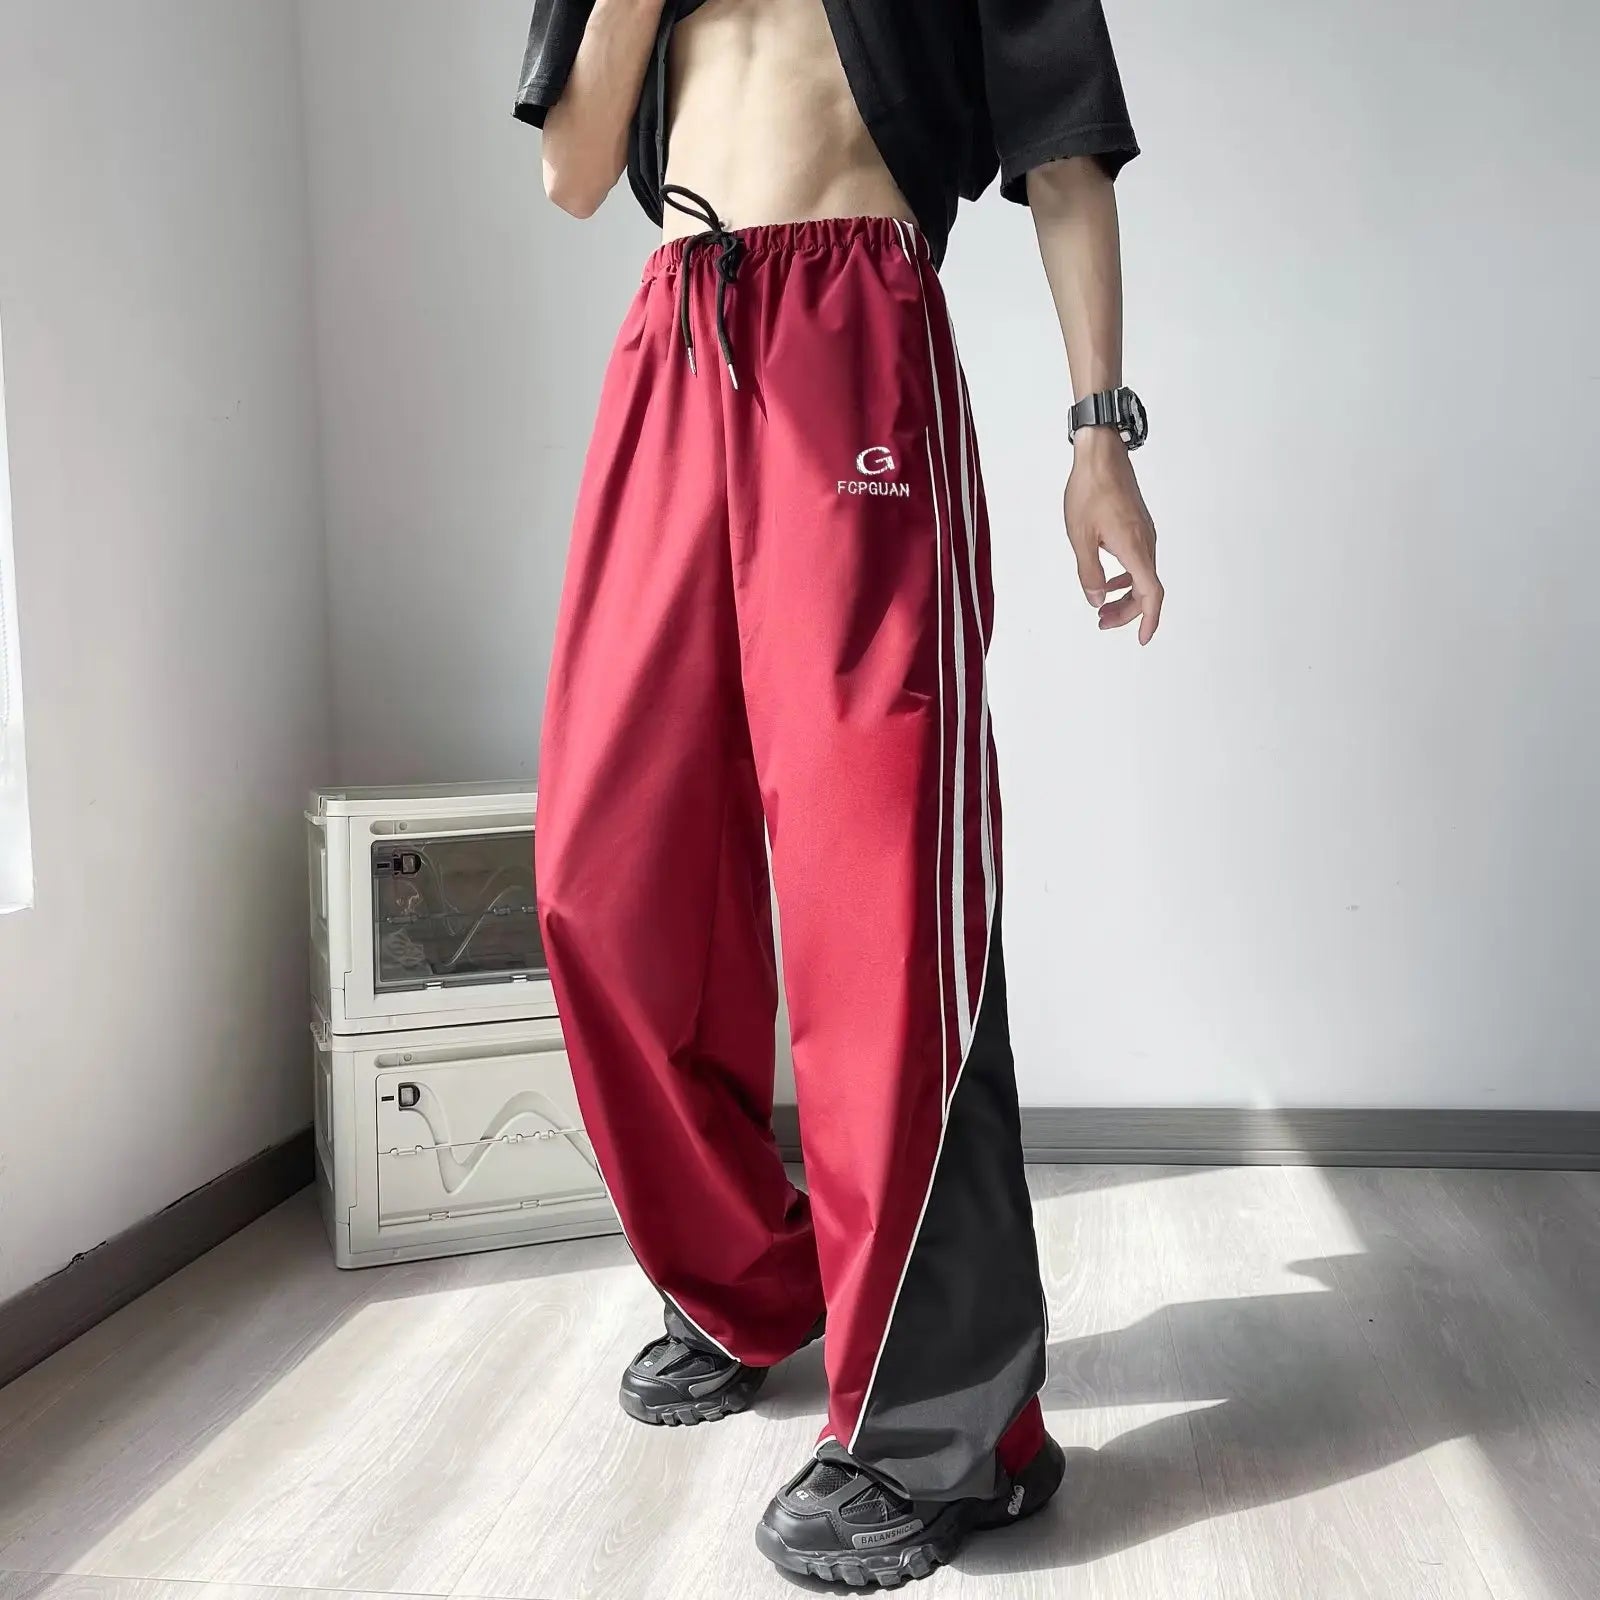 Vintage Casual Track Y2K Cargo Pants Straight Loose Striped Blue Wide Leg Pants Gym Basketball Sweatpants Trousers Korean Style voguable